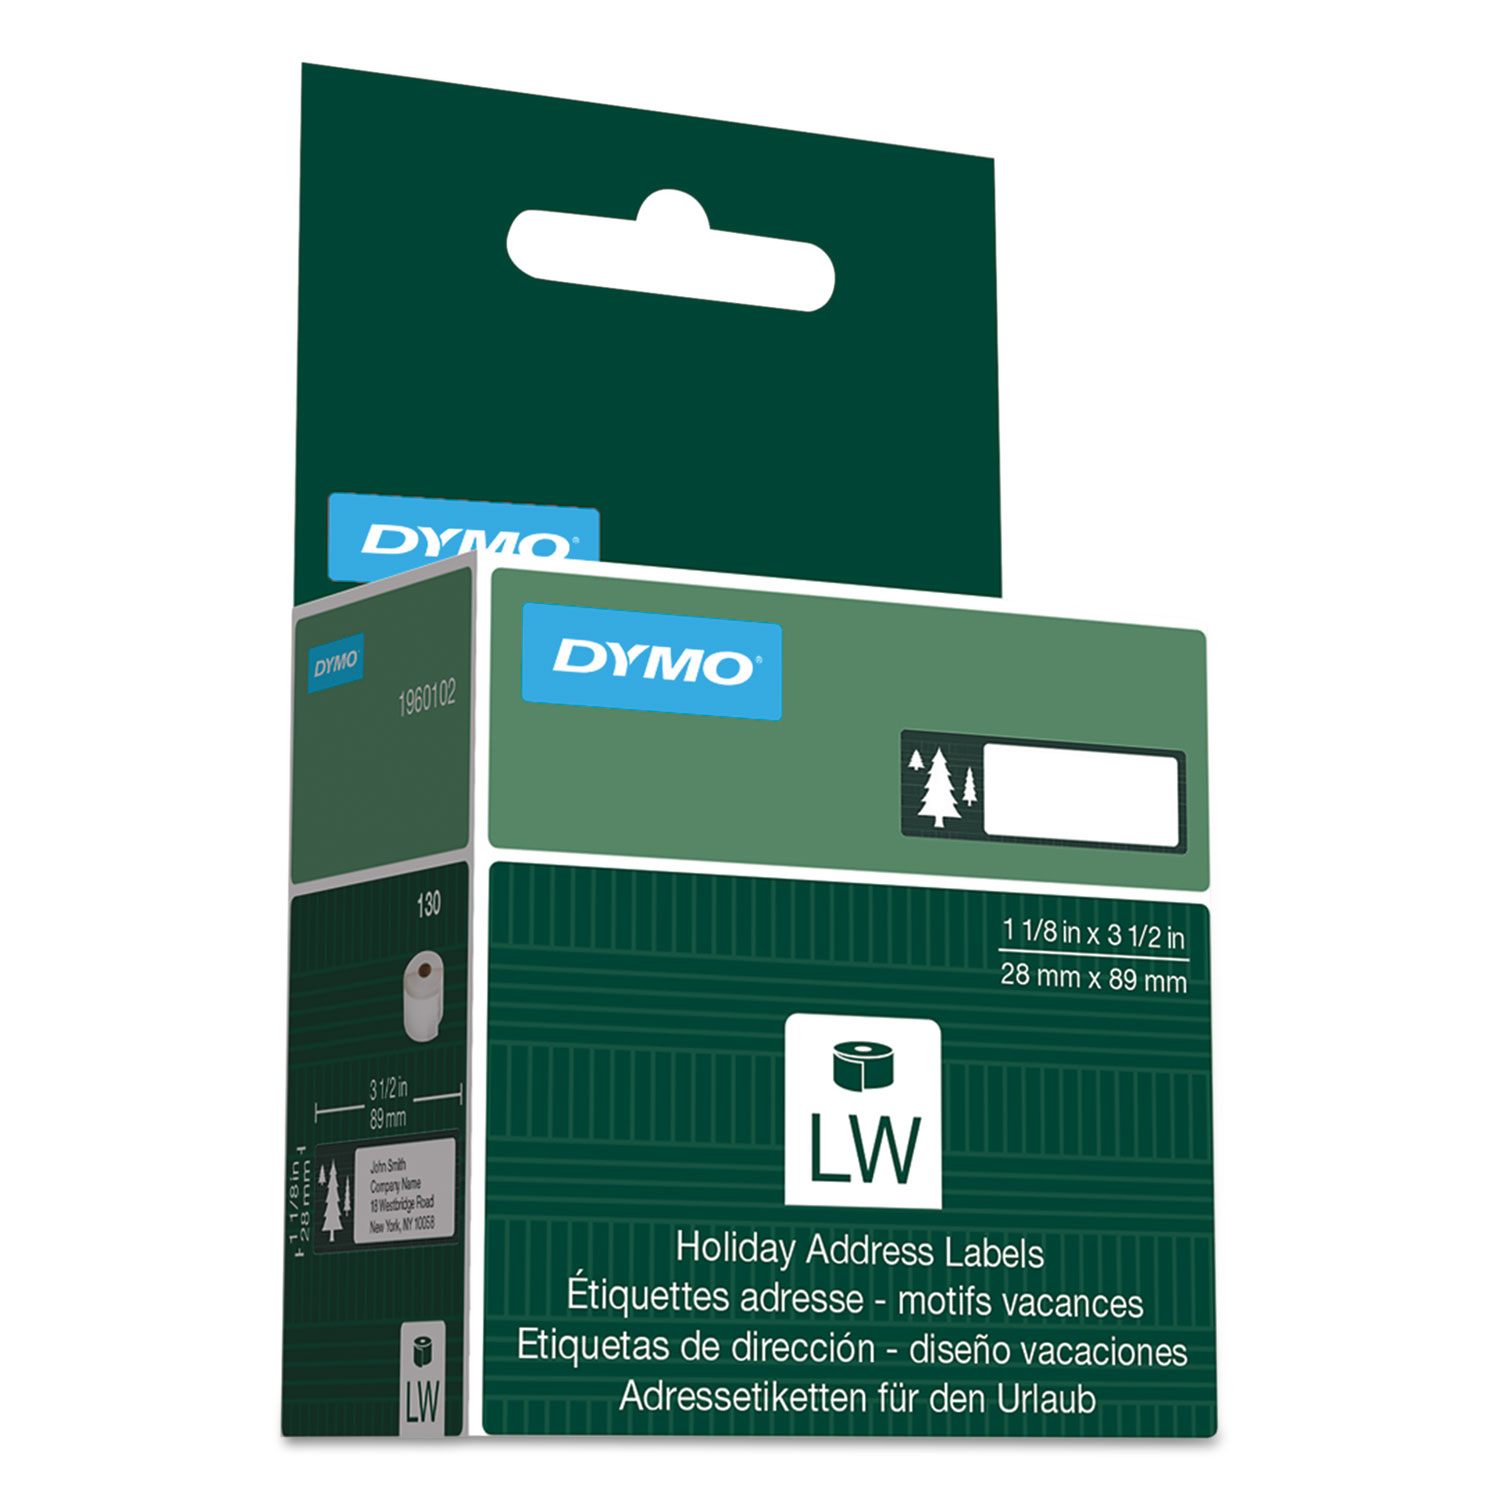  DYMO 1960102 Holiday Labels, Trees, 1.12 x 3.5, Green, 130 Labels/Roll (DYM1960102) 